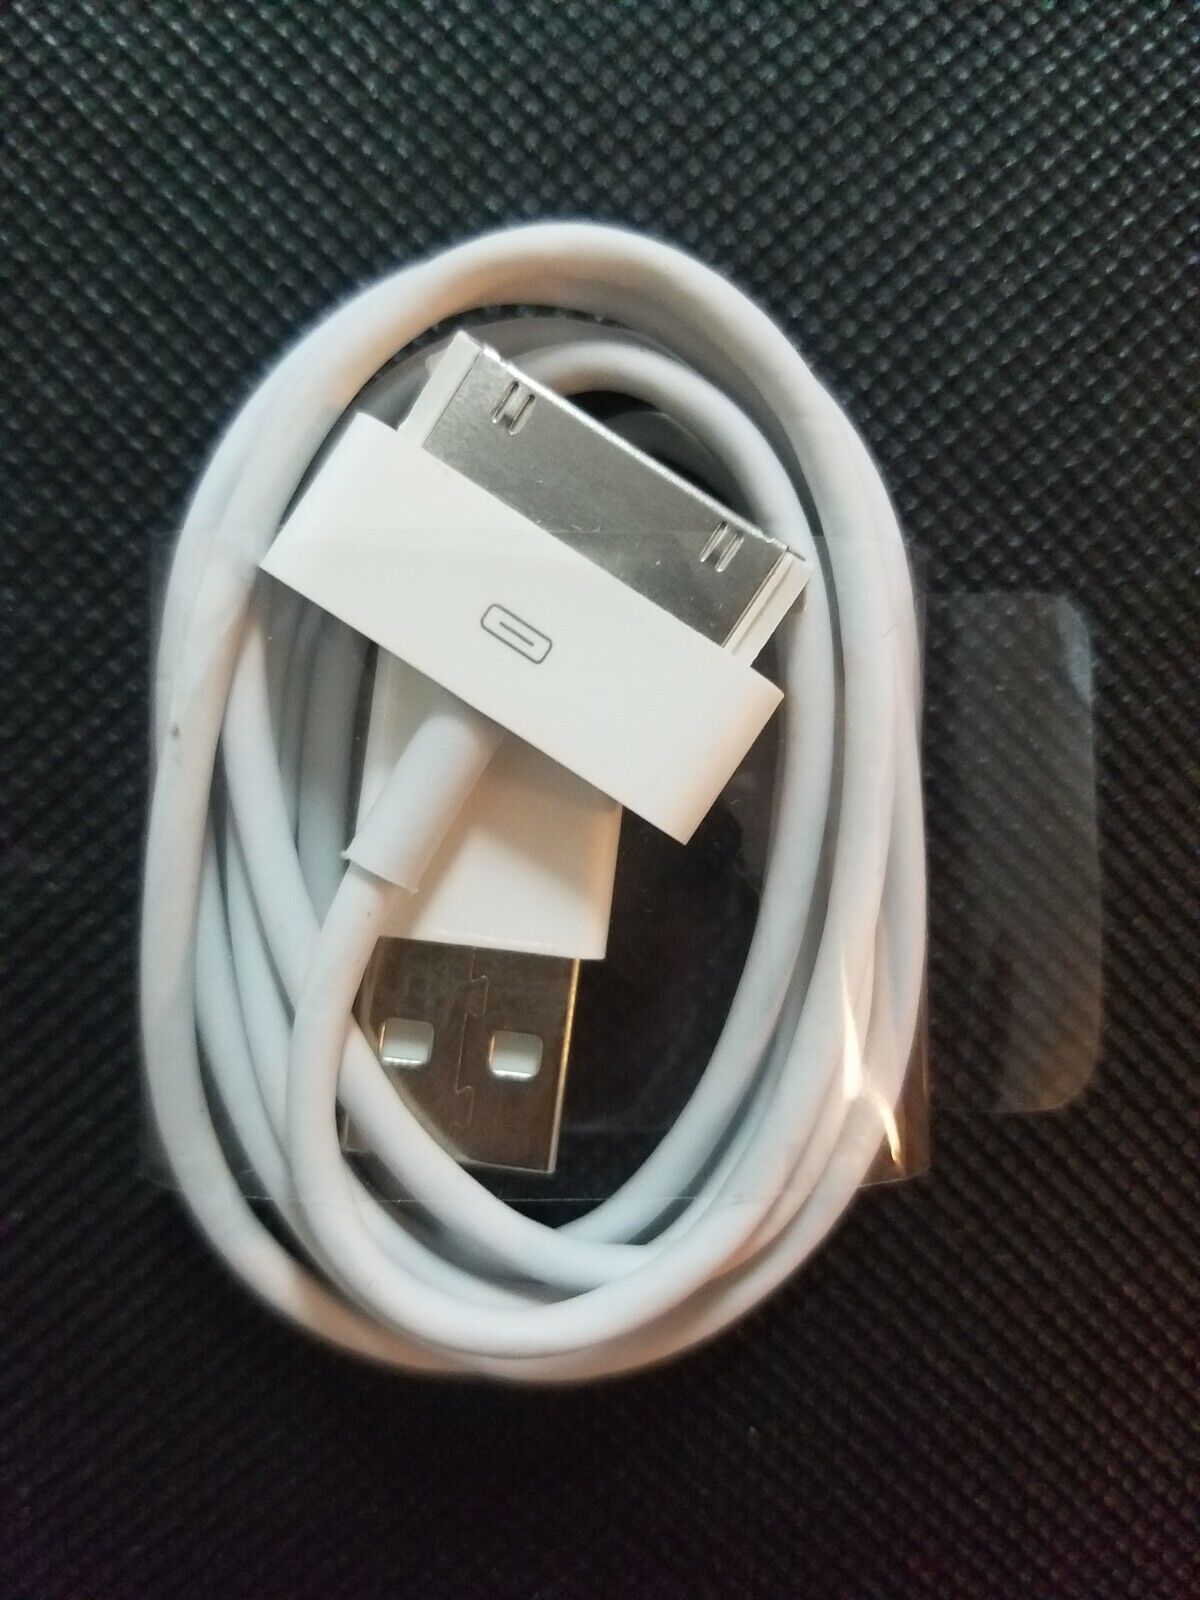 For Apple iPad 1/2/3 for iPhone 4 4G 4S 3GS Premium USB Sync Data Cable Charger